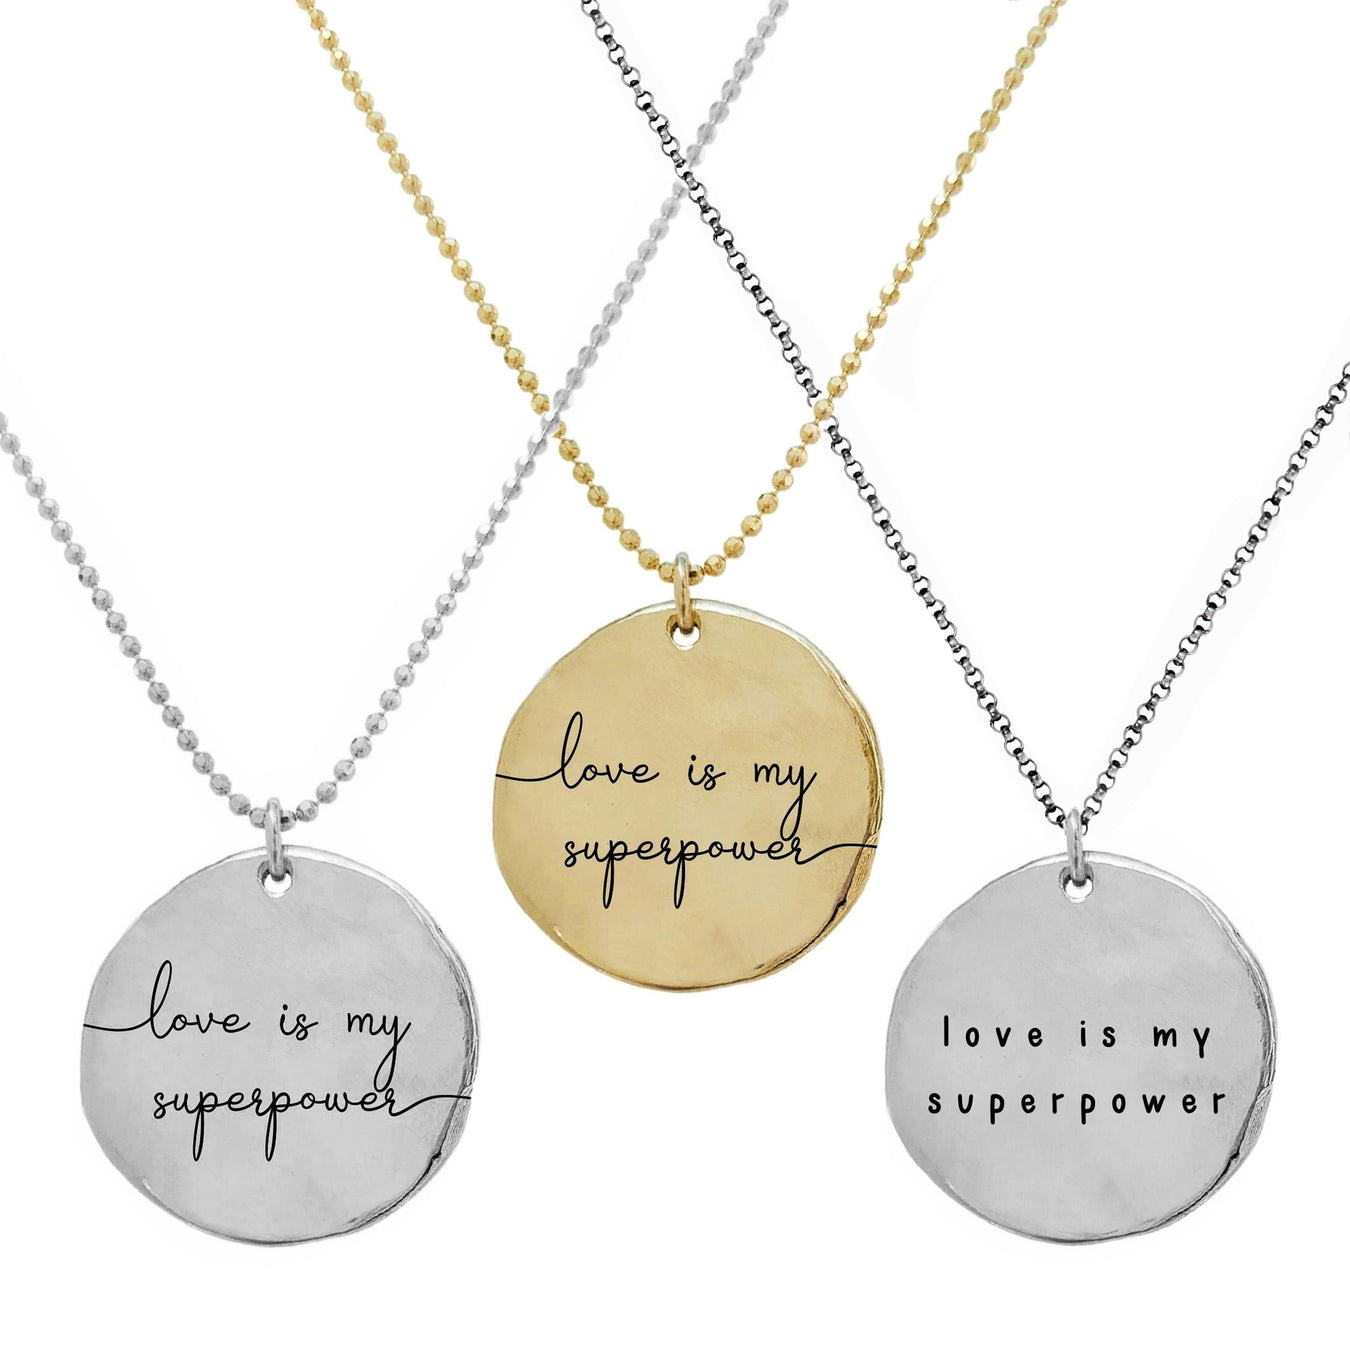 Create the Love - Love is my Superpower Necklaces - engraved silver gold chain - Blooming Lotus Jewelry